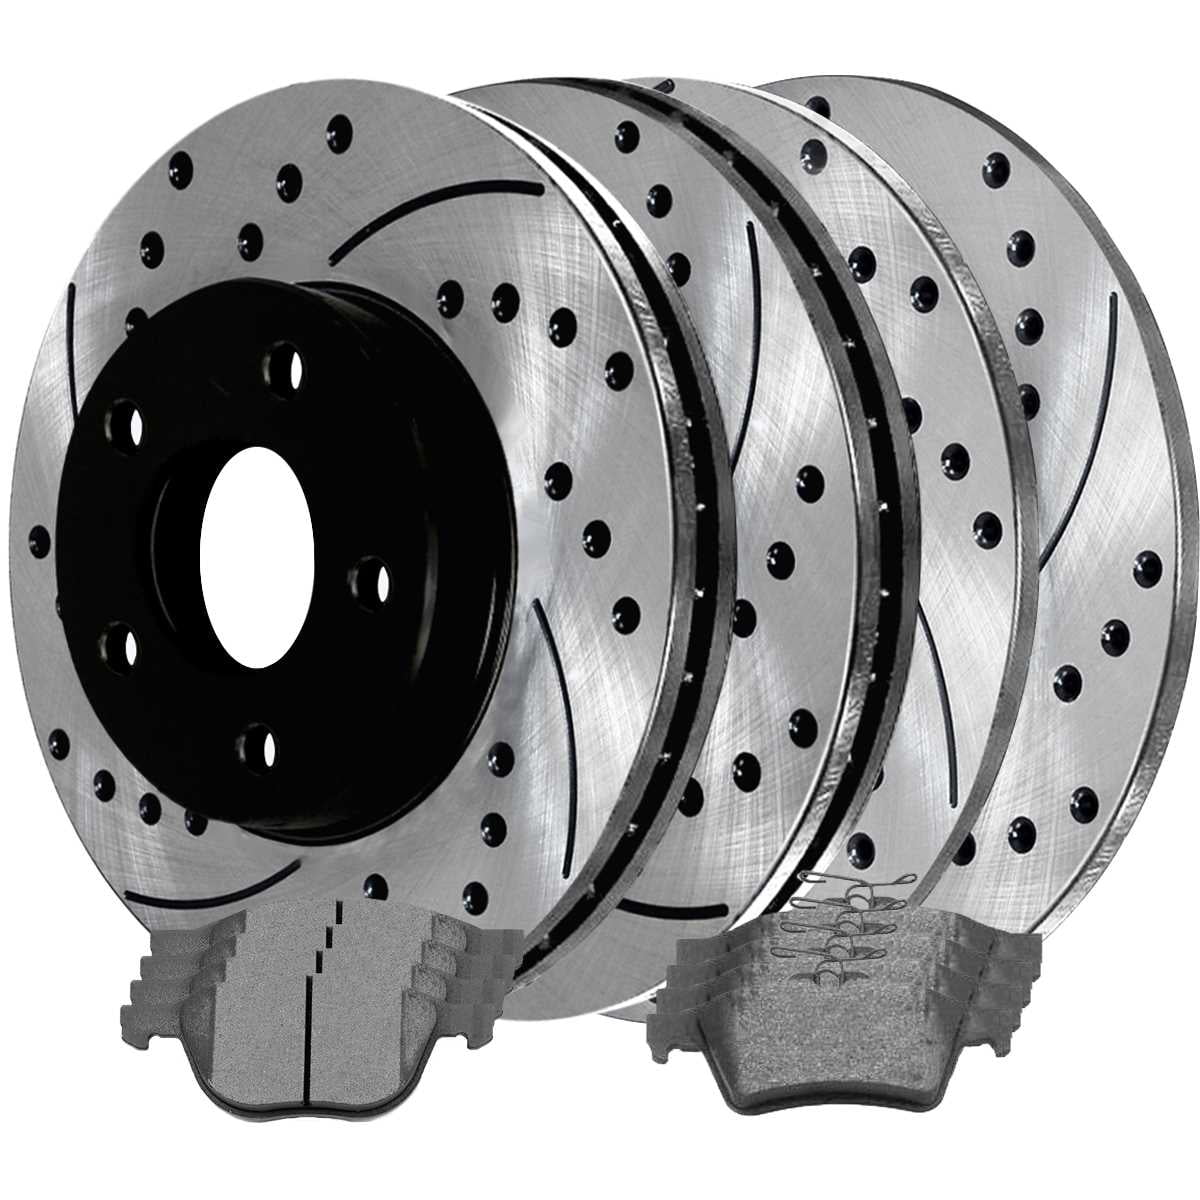 Details about   SP Performance Front Rotors for 1995 SONOMA 2 Wheel DriveSlotted T55-751863 